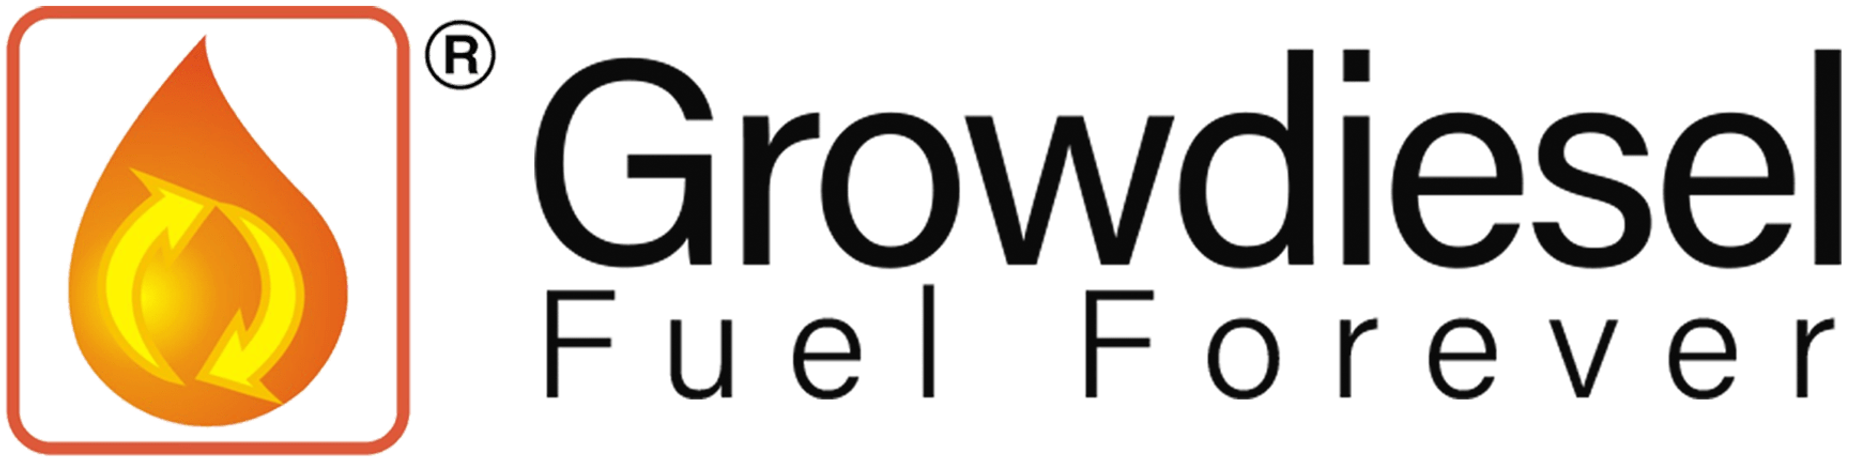 Growdiesel - Medical Mobile Clinic Service